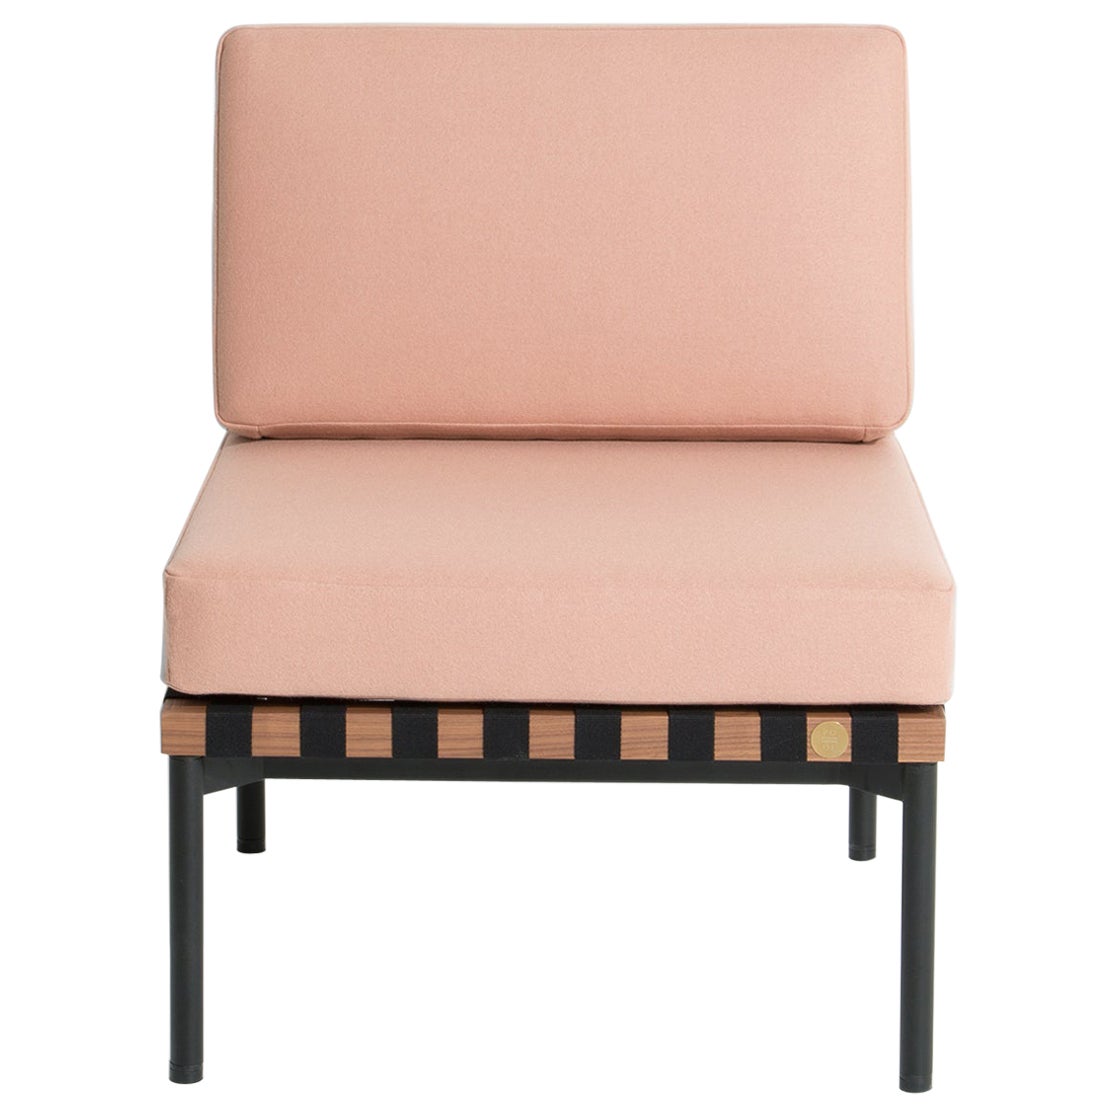 Petite Friture Grid Chair without Armrest in Peach by Studio Pool For Sale